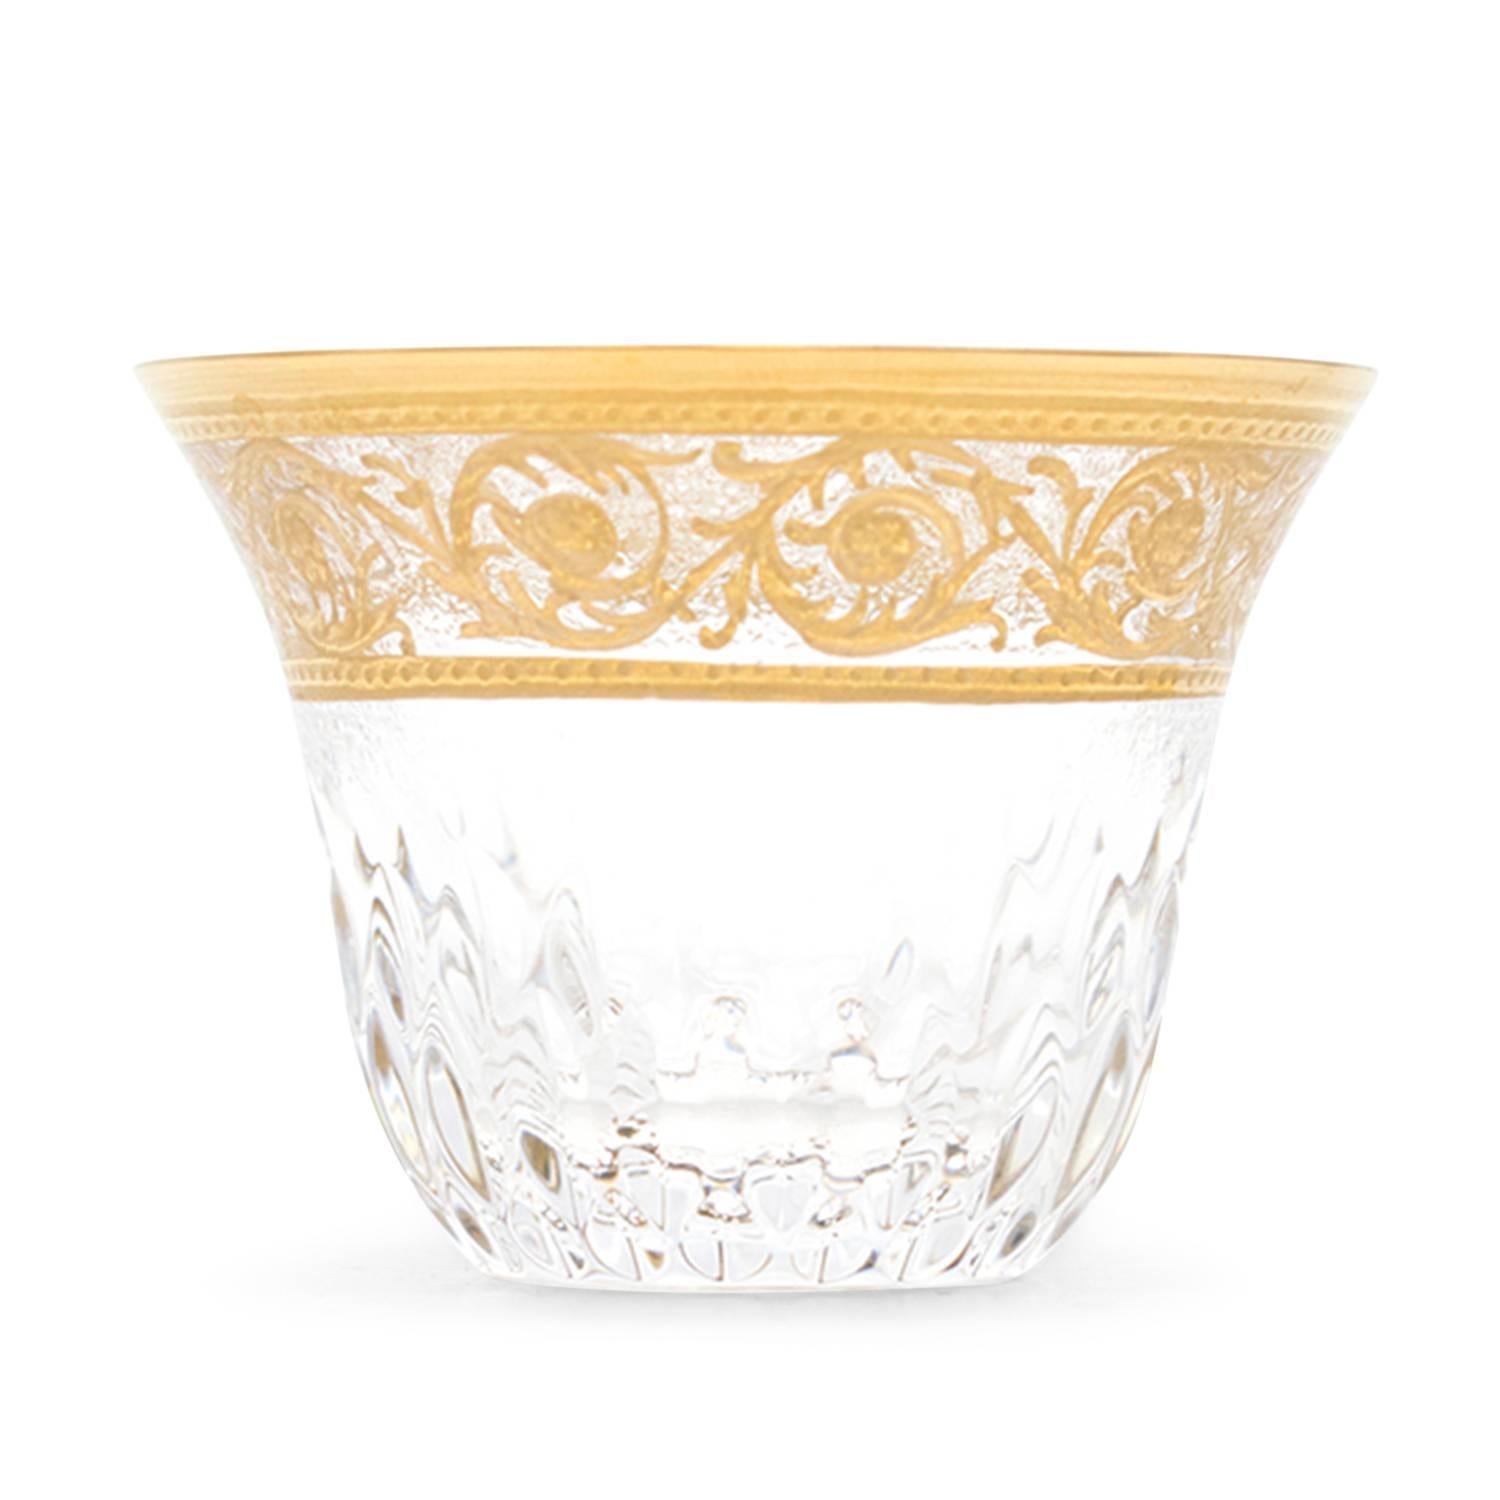 Hermes St. Louis Thistle set of six gold tea cups. 

Set of six crystal mini tea cups with hand-painted gold detailing. 

Measurements	Approx. Diameter: 4.8 Cm Height: 4.3 Cm

Condition - 10/10
Storage marks on box.